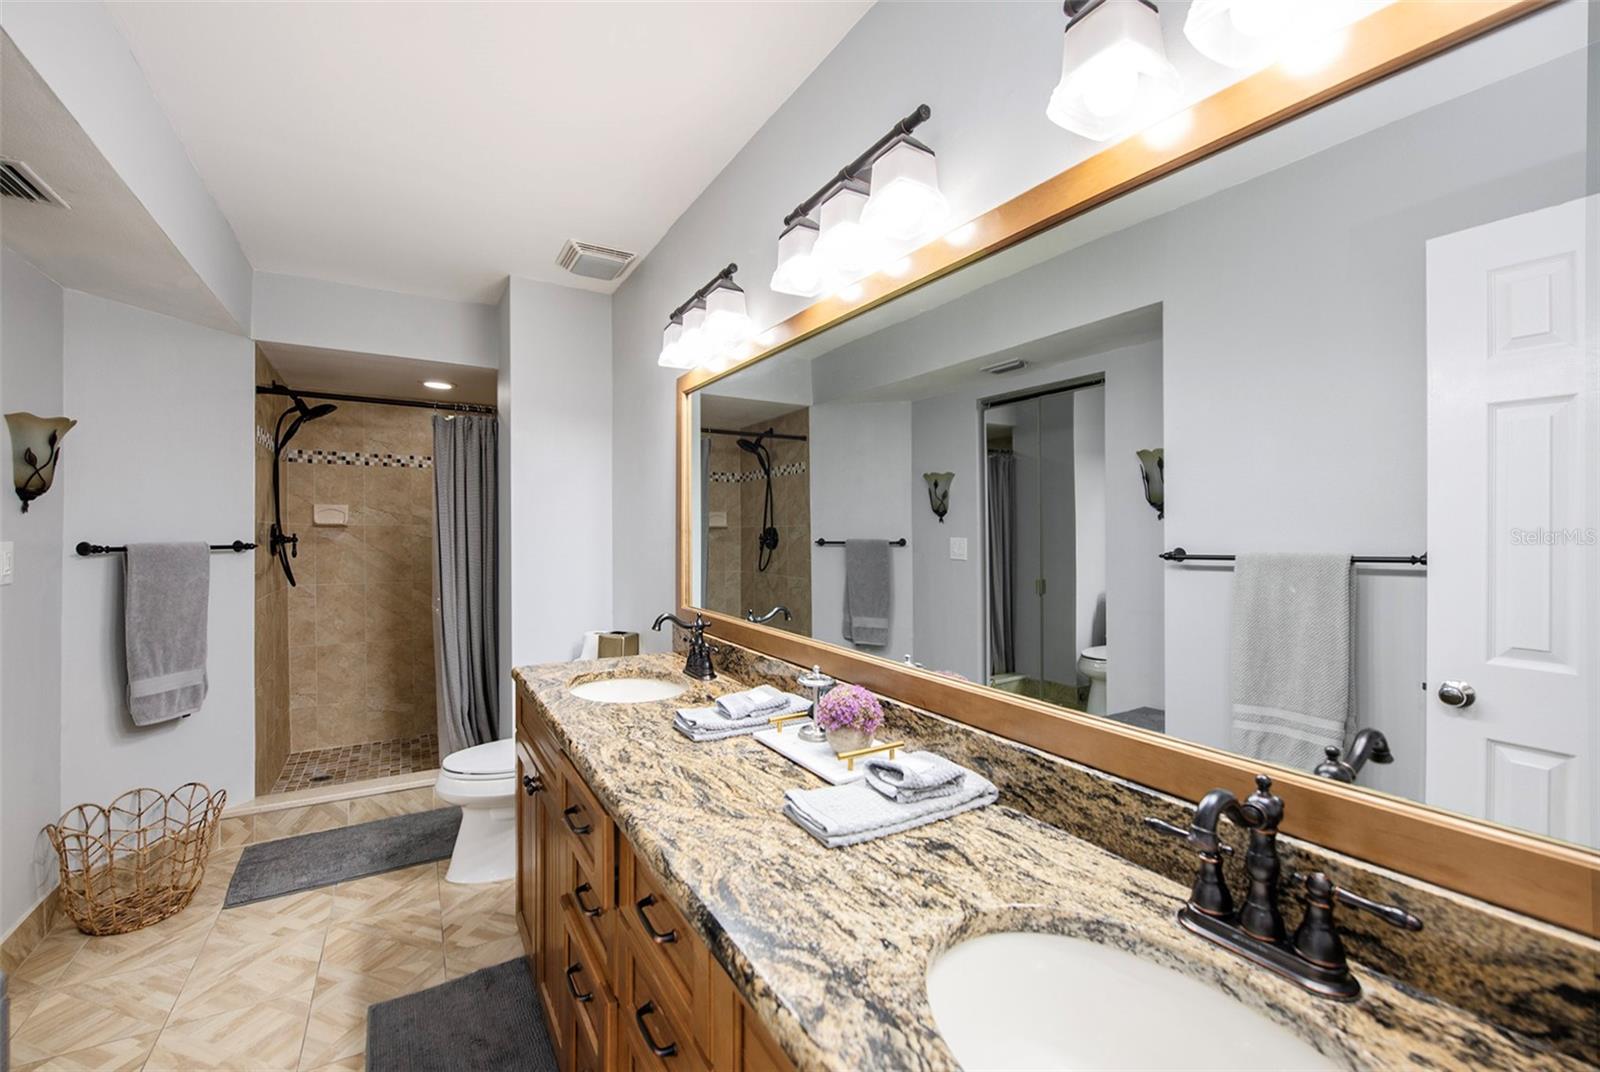 Master bathroom with beautiful finishes, dual vanity sinks, a walk in closet, and a shower